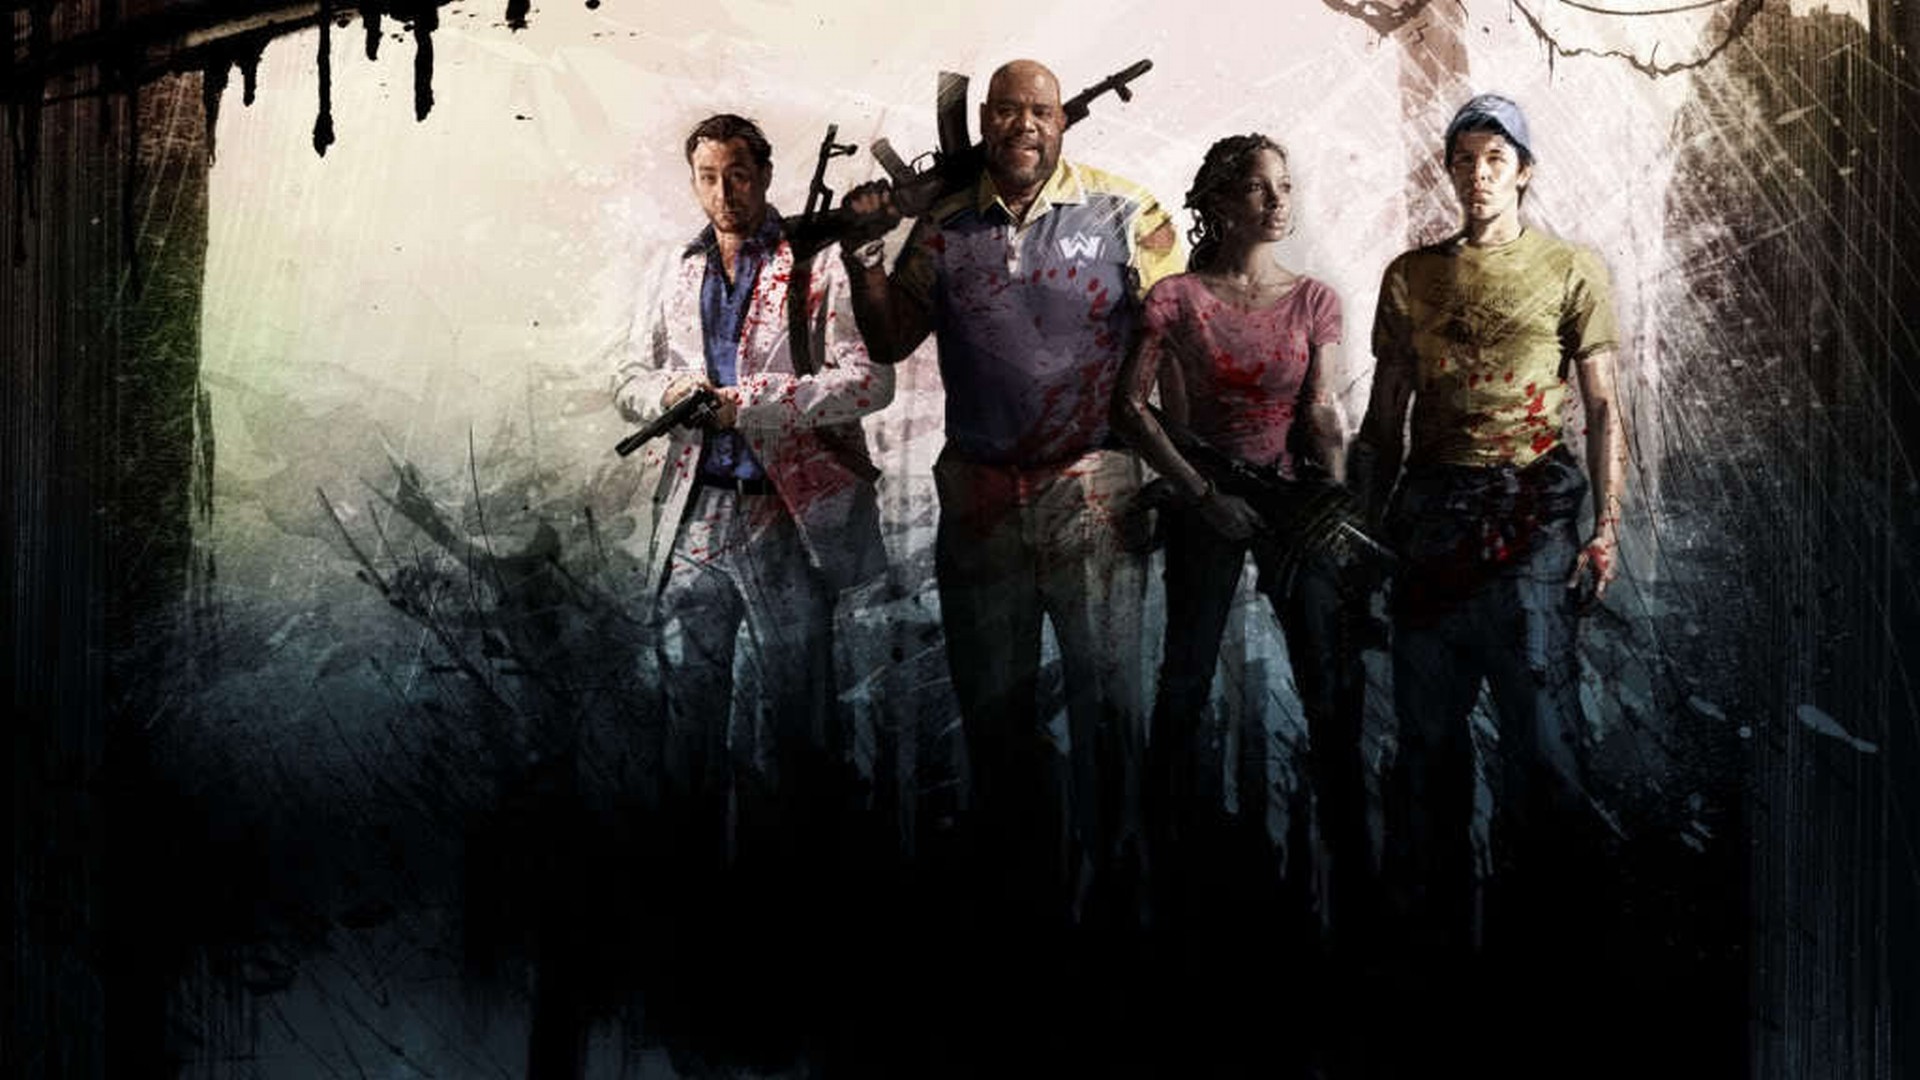 1920x1080 Search Results for “wallpaper left 4 dead 2 hd” – Adorable Wallpapers